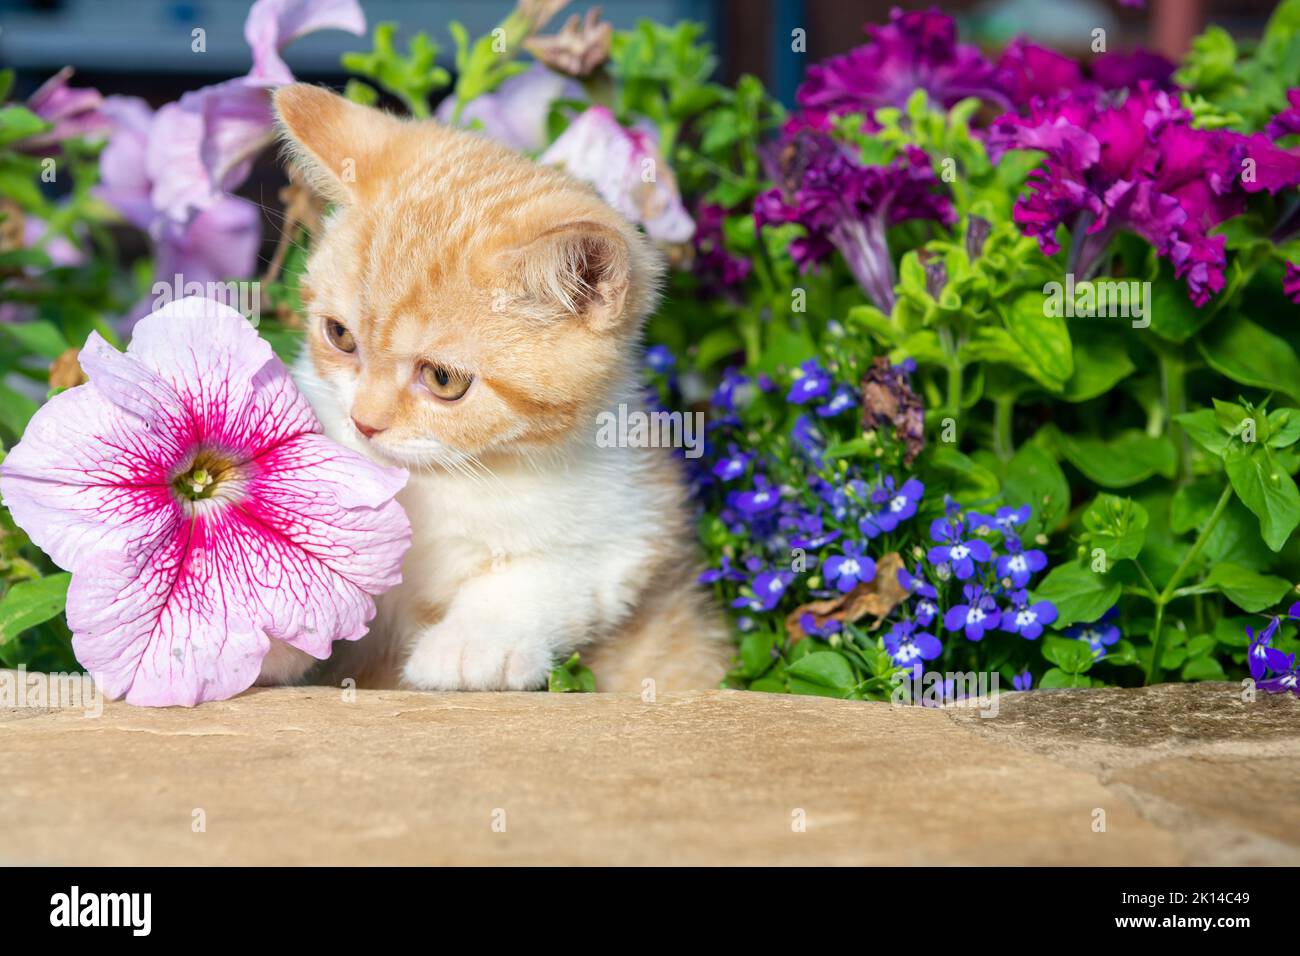 British red shorthair kitten sitting on a rock in the grass close-up, against a pink petunia background Stock Photo